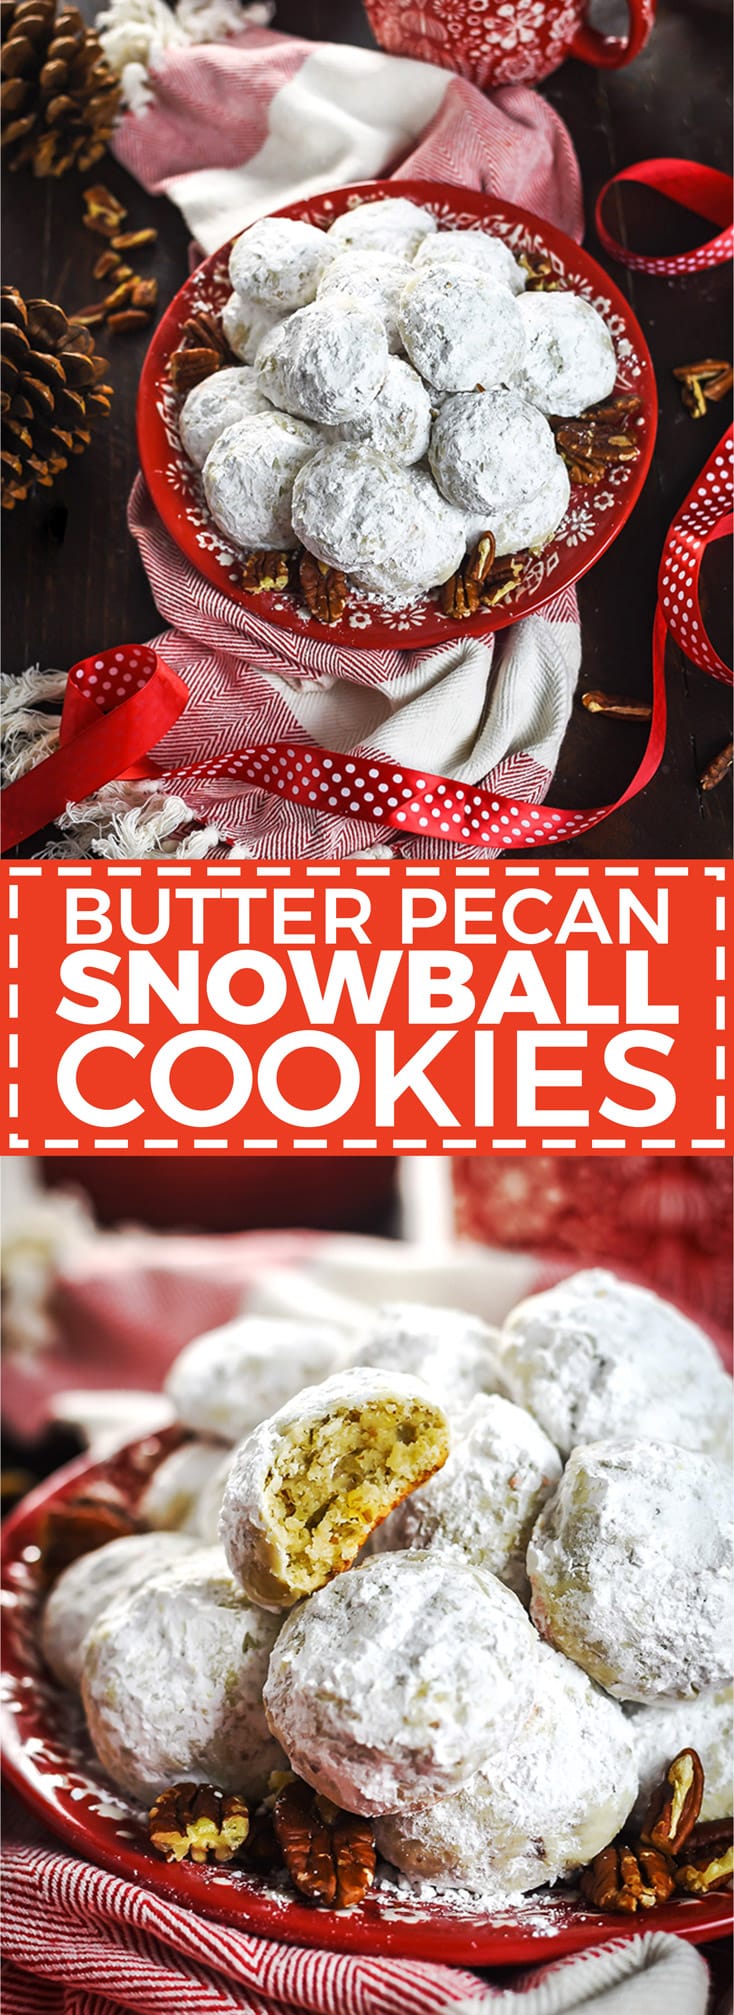 Butter Pecan Snowball Cookies. These tender, tangy, buttery shortbread cookies are loaded with toasted pecans and absolutely perfect for your Christmas cookie platter. | hostthetoast.com